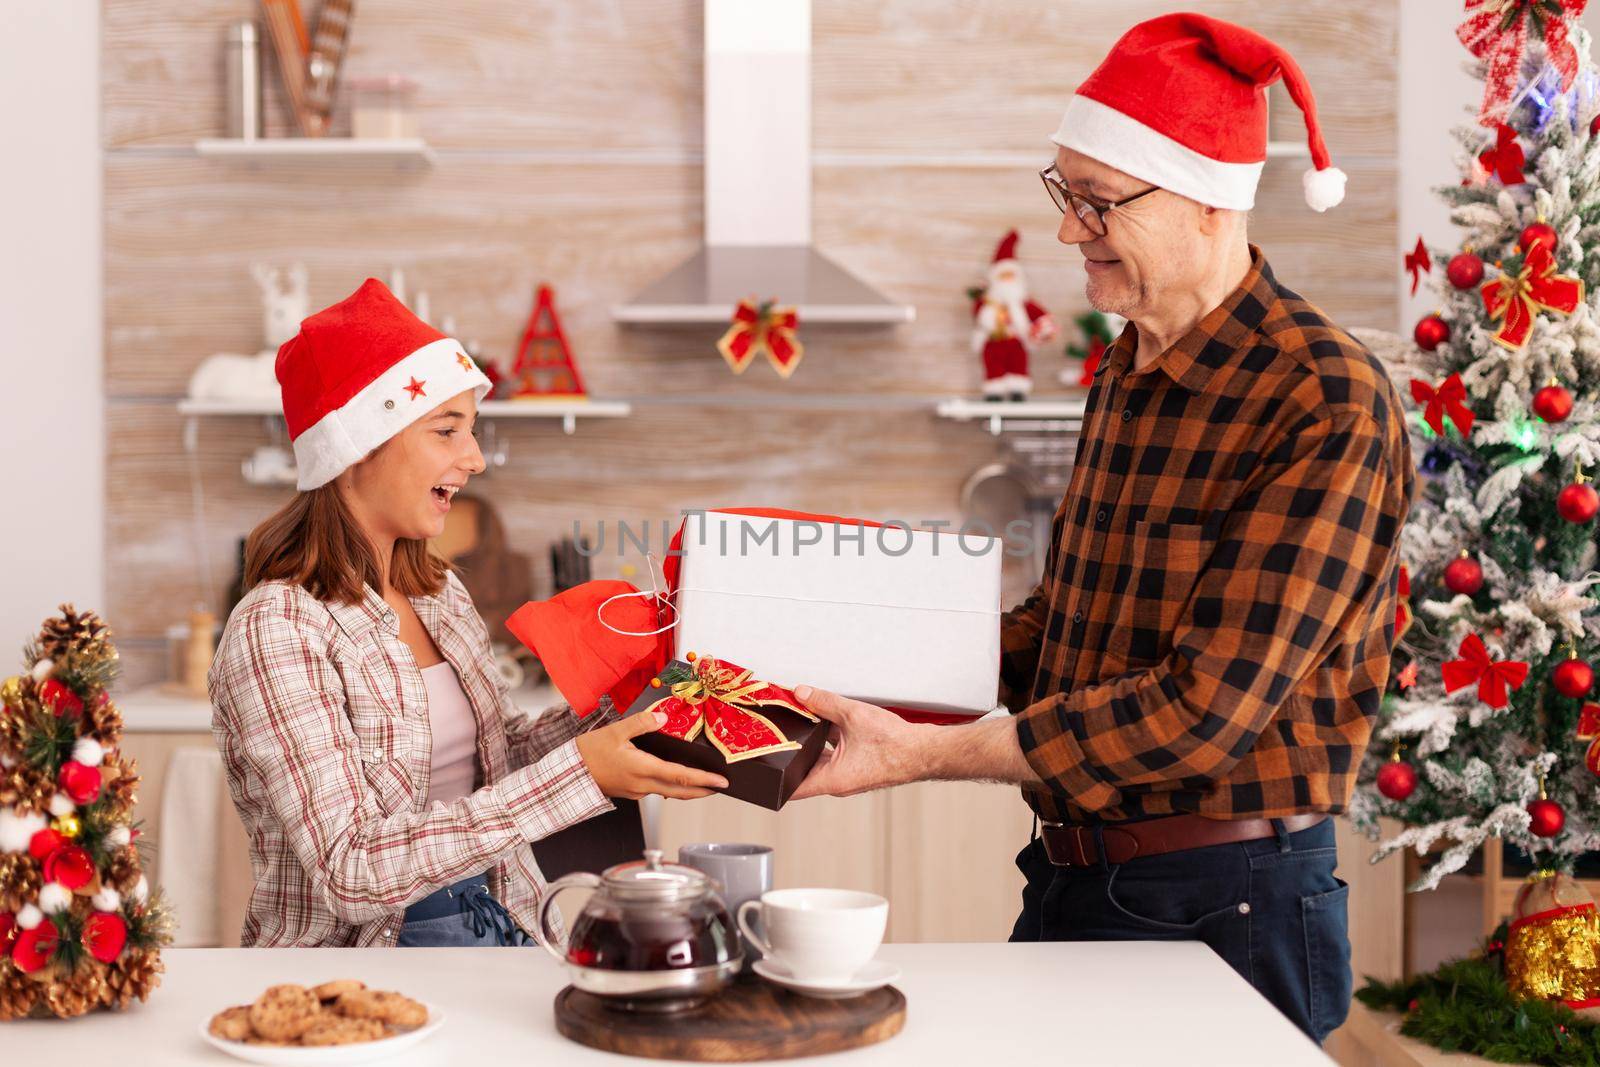 Grandfather surprising granddaughter with xmas wrapper gift enjoying christmas holiday together in decorated kitchen. Child celebrating winter season changing present with ribbon on it with grandpa